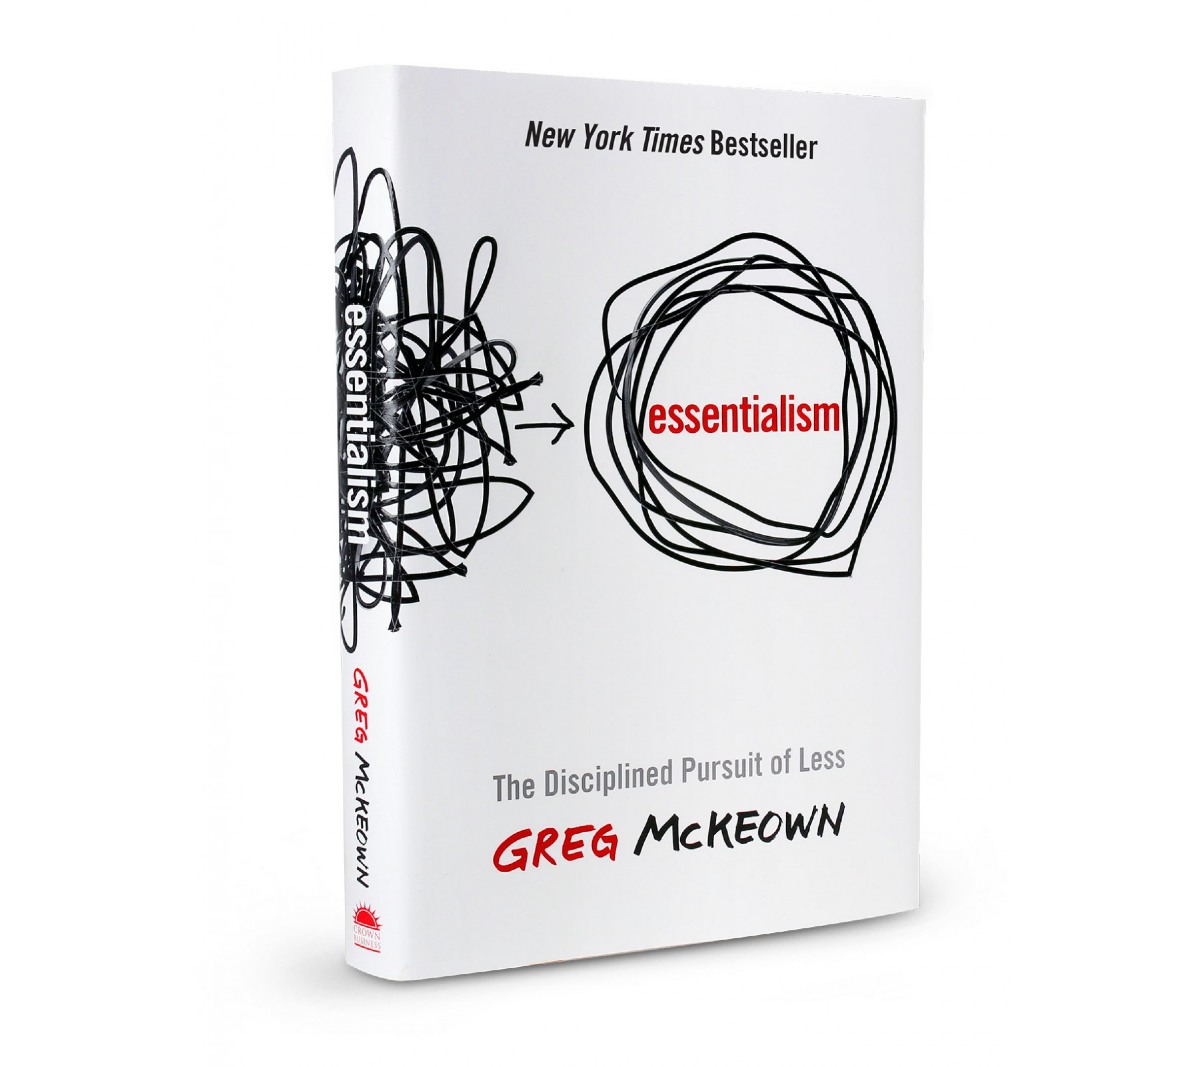 Heir Stratford on Avon Simplicity Essentialism Book Review – The Disciplined Pursuit of Less by Greg McKeown